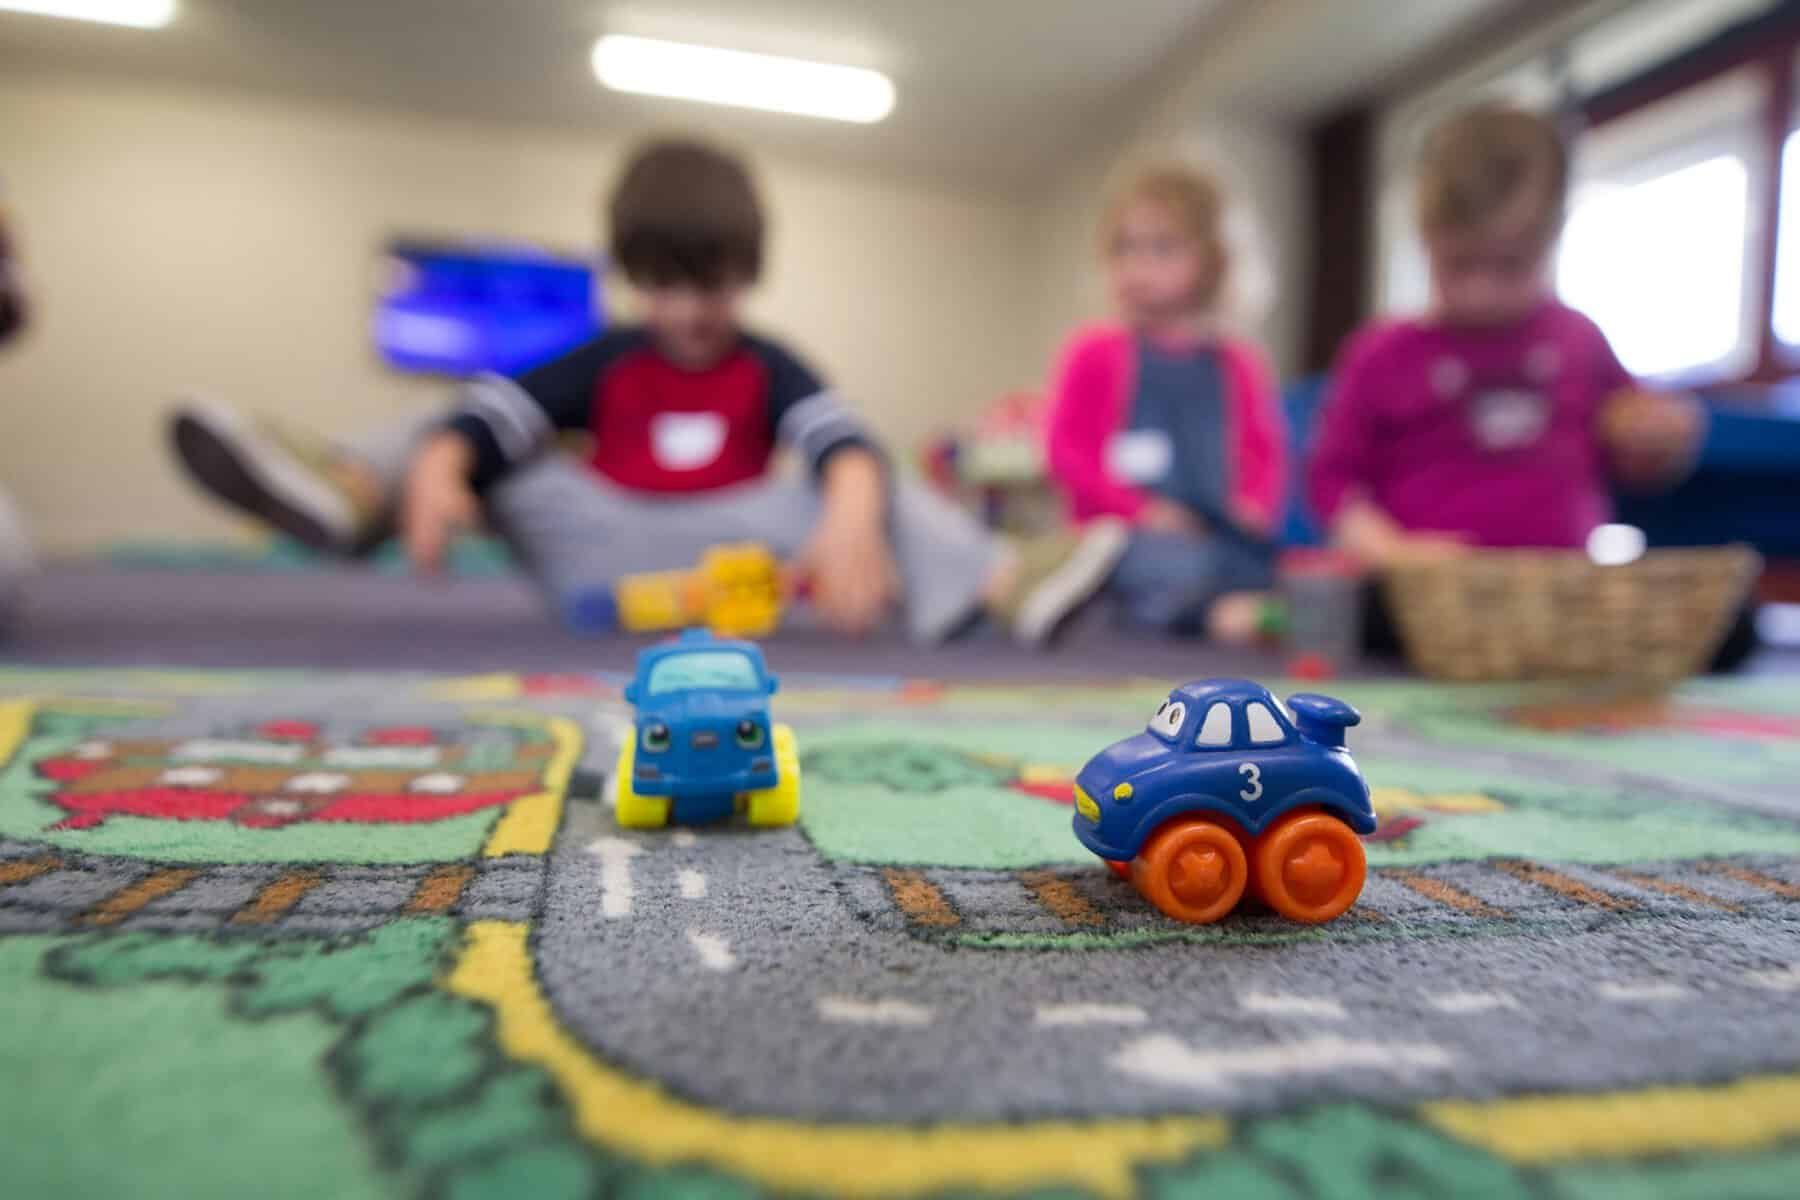 two toy cars on the floor of a modular nursery building